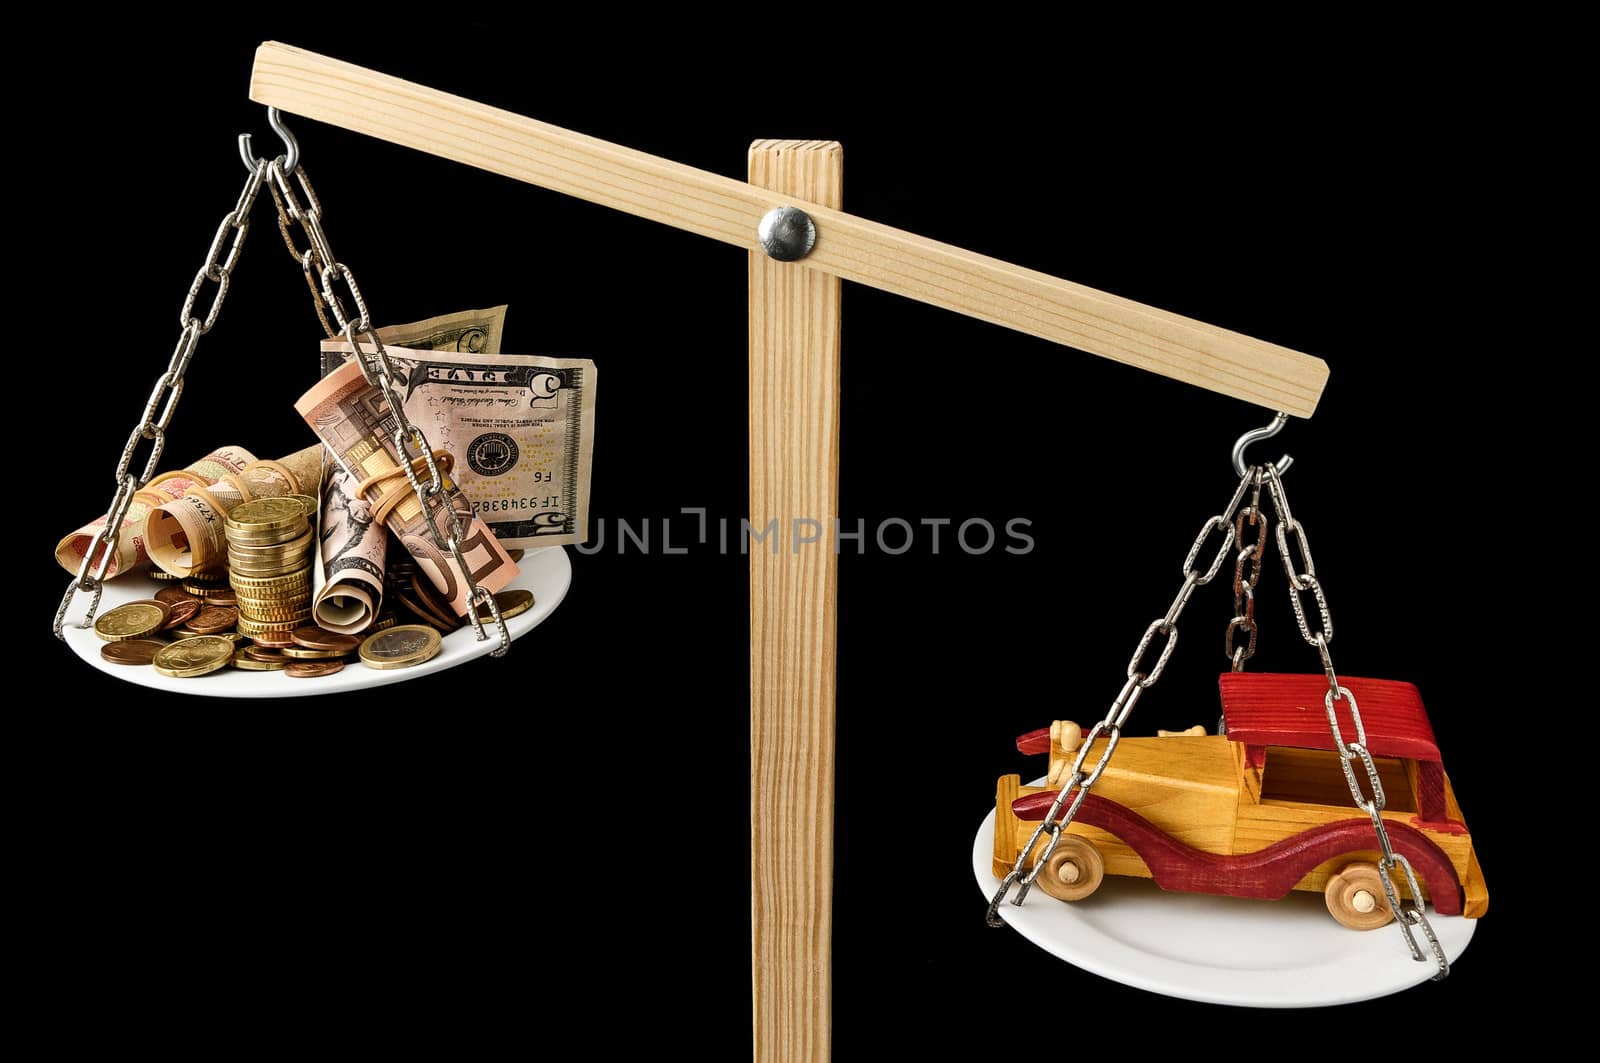 Money and Toy Wooden Car on a Two Pan Balance